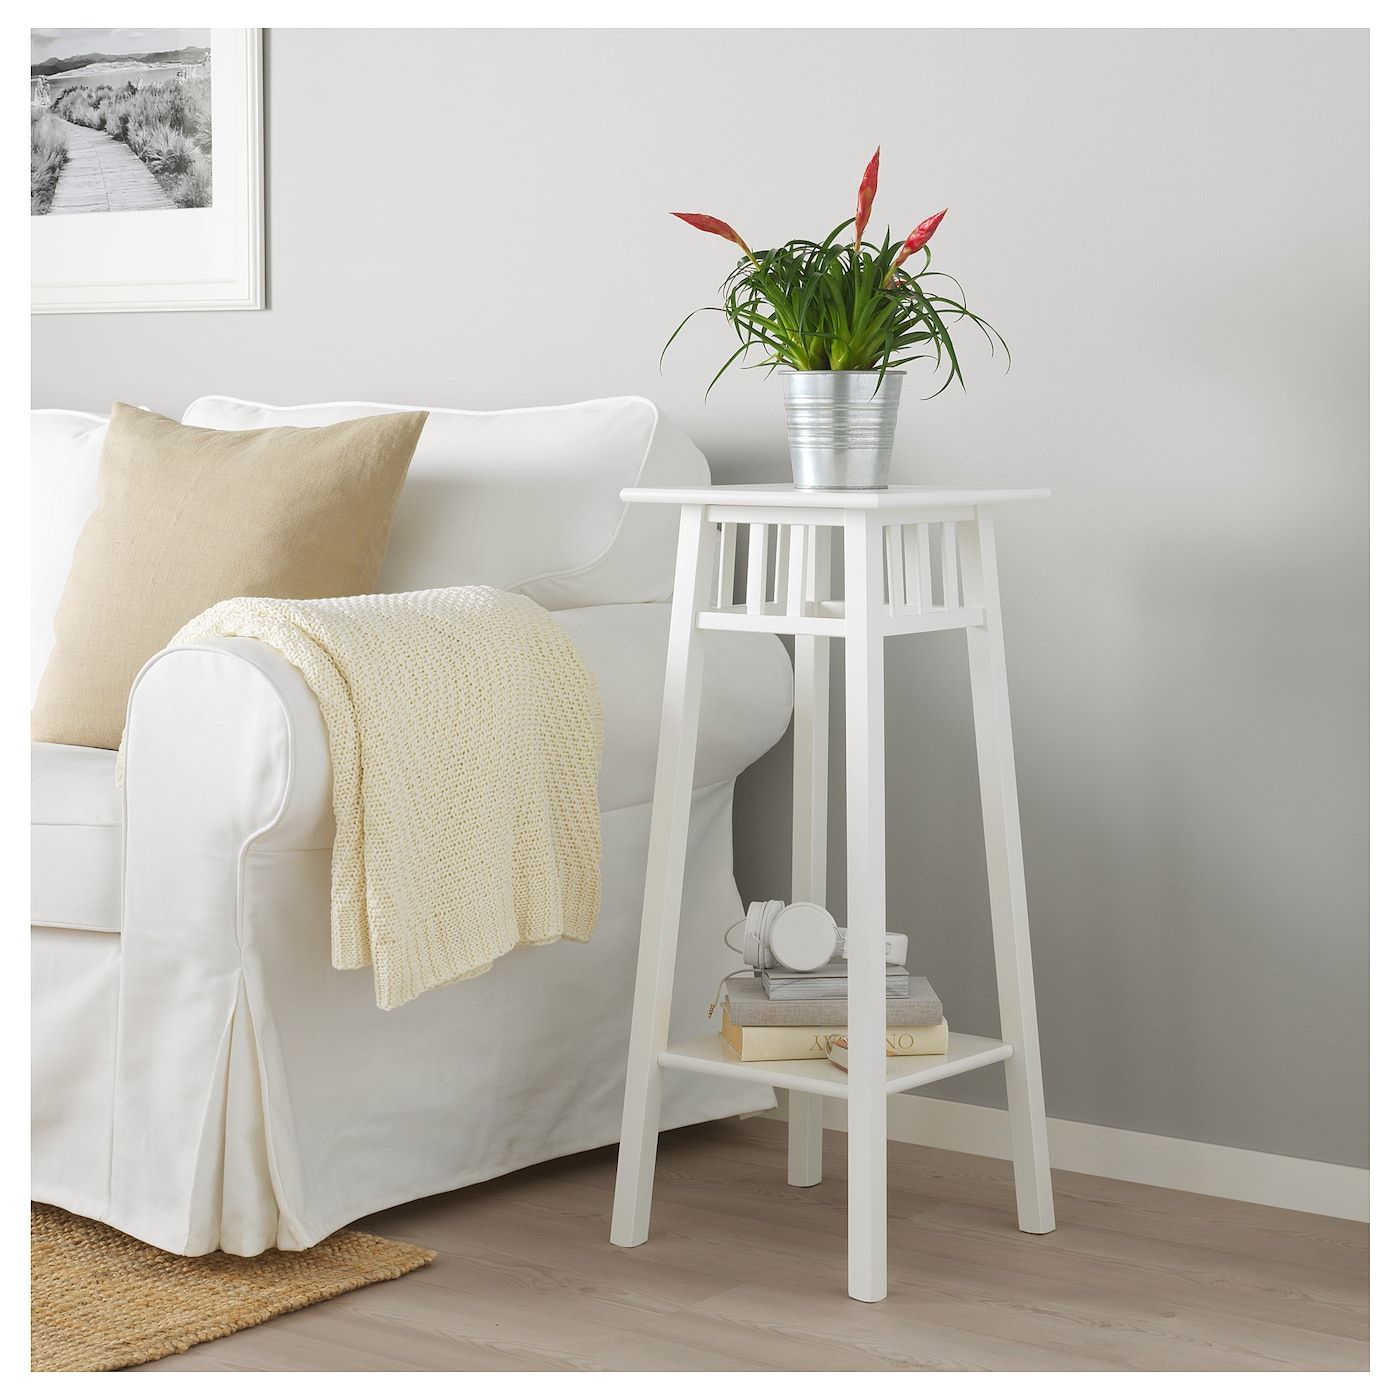 Lantliv Plant Stand, White, 78 Cm – Ikea Ireland With White Plant Stands (View 6 of 15)